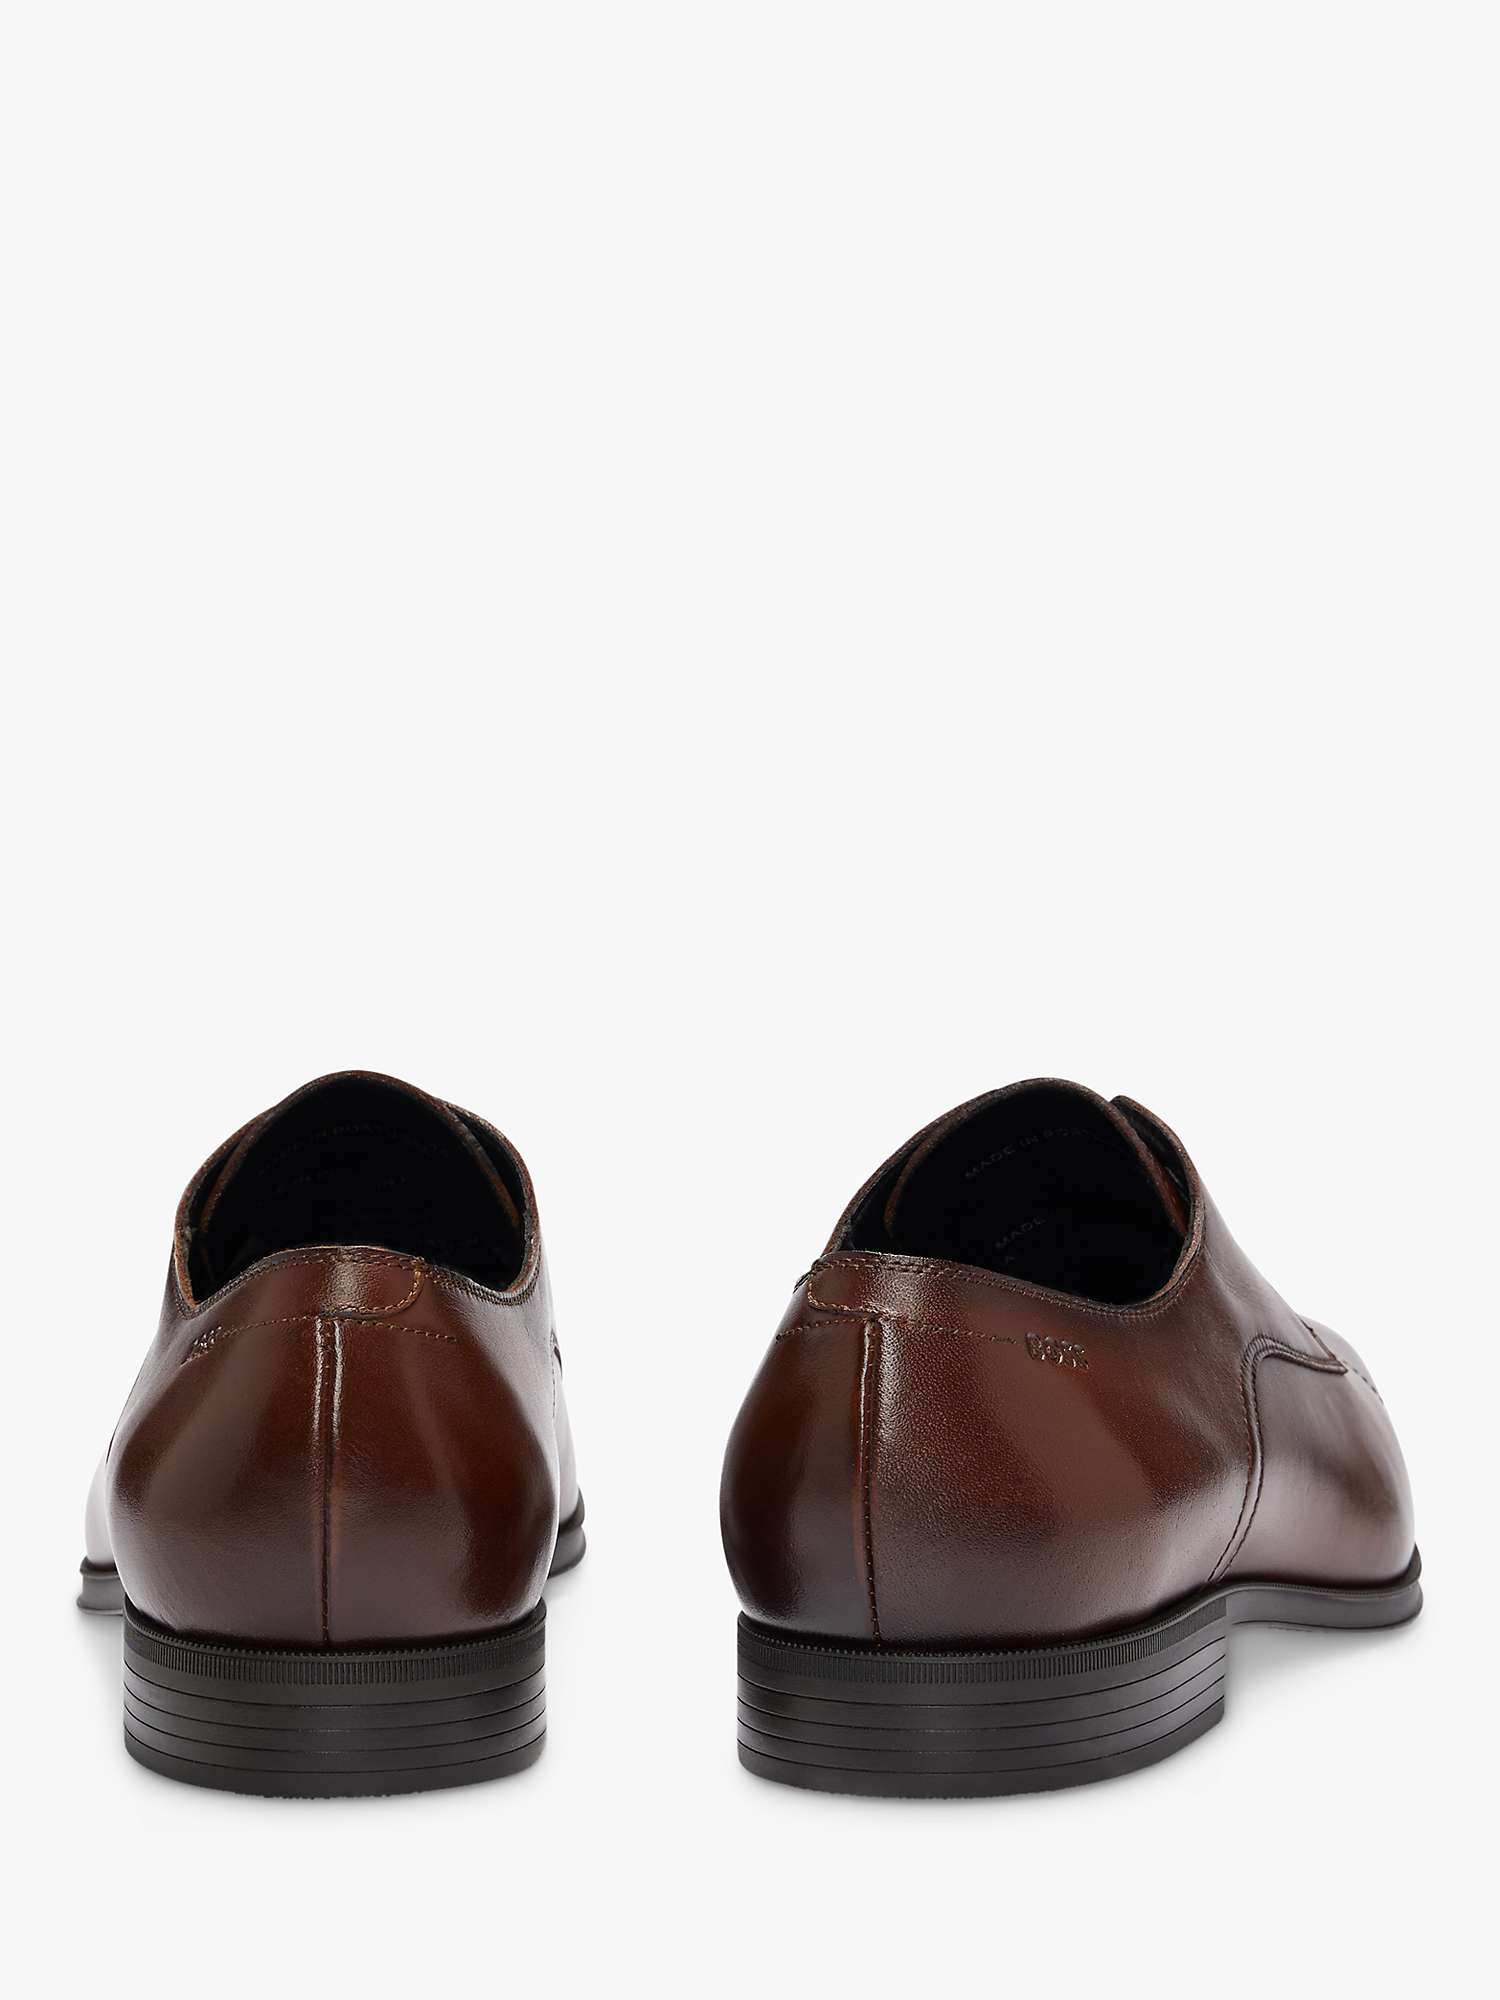 Buy BOSS Theon Derby Shoes Online at johnlewis.com